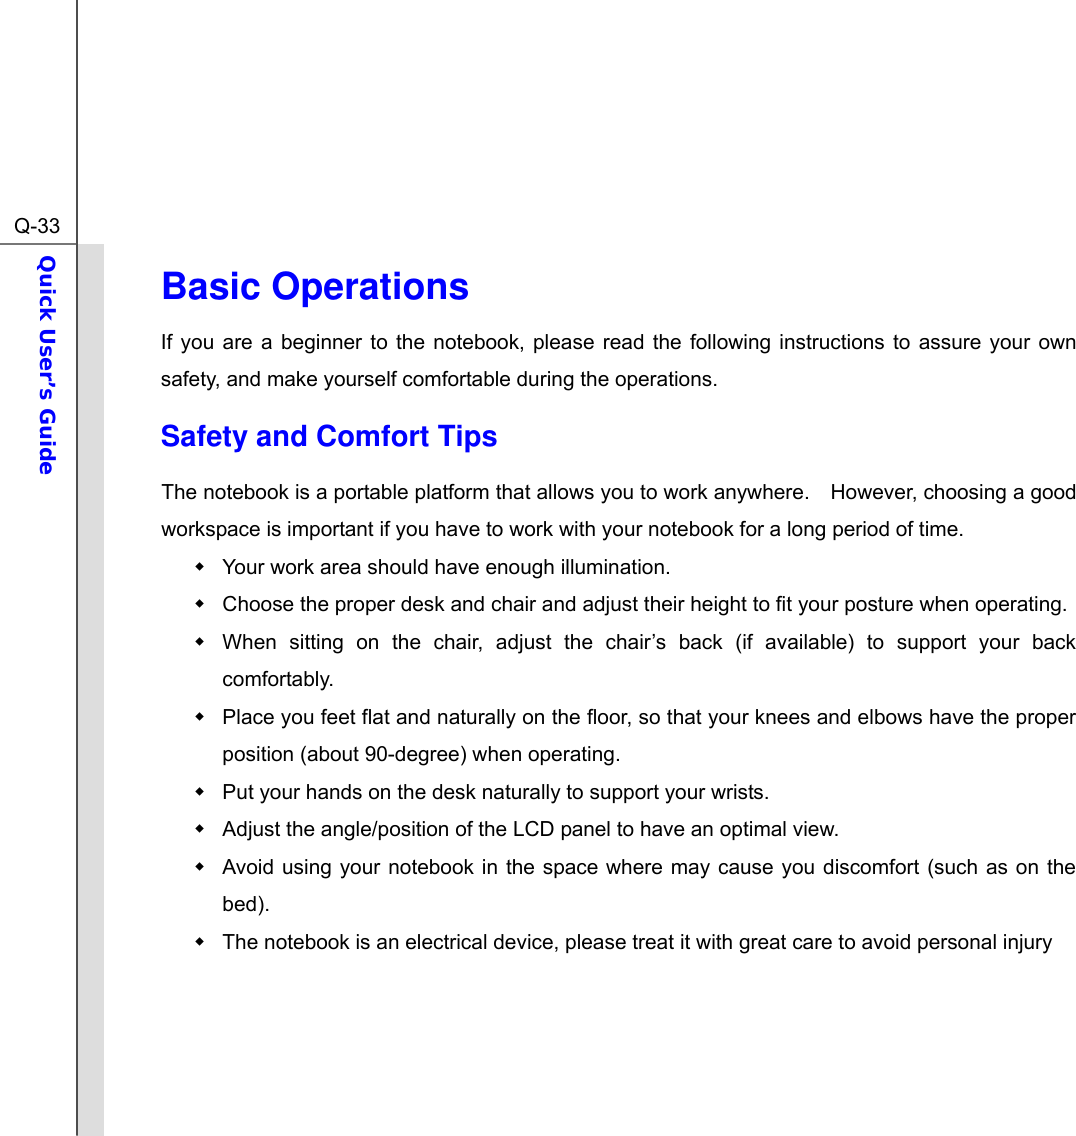  Q-33Quick User’s Guide  Basic Operations If you are a beginner to the notebook, please read the following instructions to assure your own safety, and make yourself comfortable during the operations. Safety and Comfort Tips The notebook is a portable platform that allows you to work anywhere.    However, choosing a good workspace is important if you have to work with your notebook for a long period of time.   Your work area should have enough illumination.   Choose the proper desk and chair and adjust their height to fit your posture when operating.   When sitting on the chair, adjust the chair’s back (if available) to support your back comfortably.   Place you feet flat and naturally on the floor, so that your knees and elbows have the proper position (about 90-degree) when operating.   Put your hands on the desk naturally to support your wrists.   Adjust the angle/position of the LCD panel to have an optimal view.   Avoid using your notebook in the space where may cause you discomfort (such as on the bed).   The notebook is an electrical device, please treat it with great care to avoid personal injury     